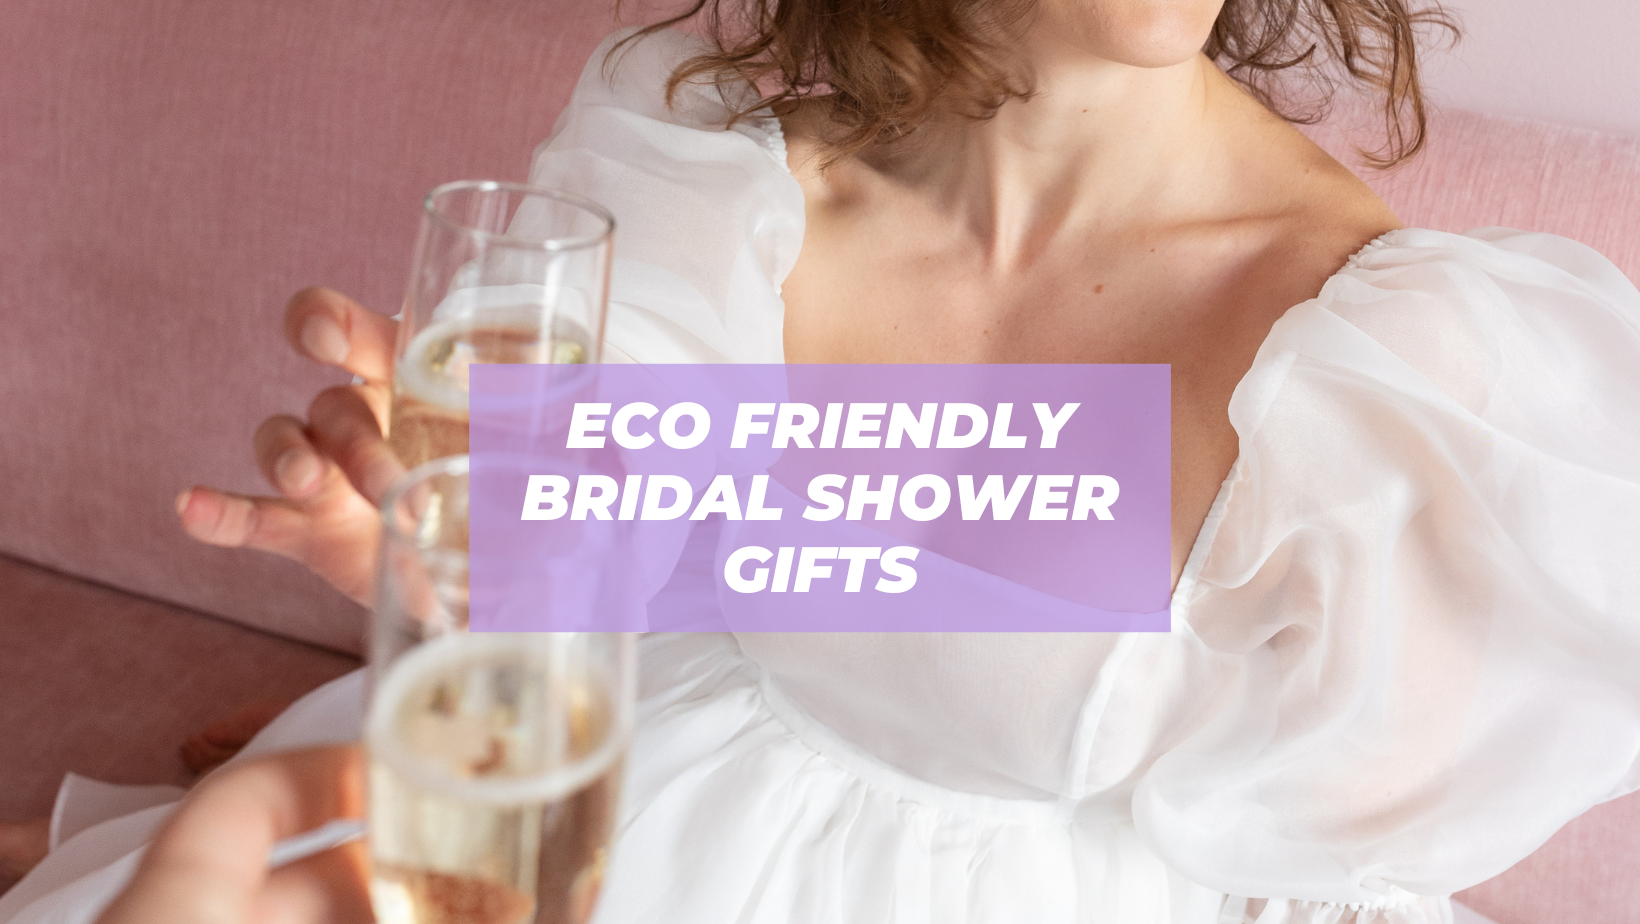 Wedding Day Gifts for the Bride (That She'll Actually Use and Love)